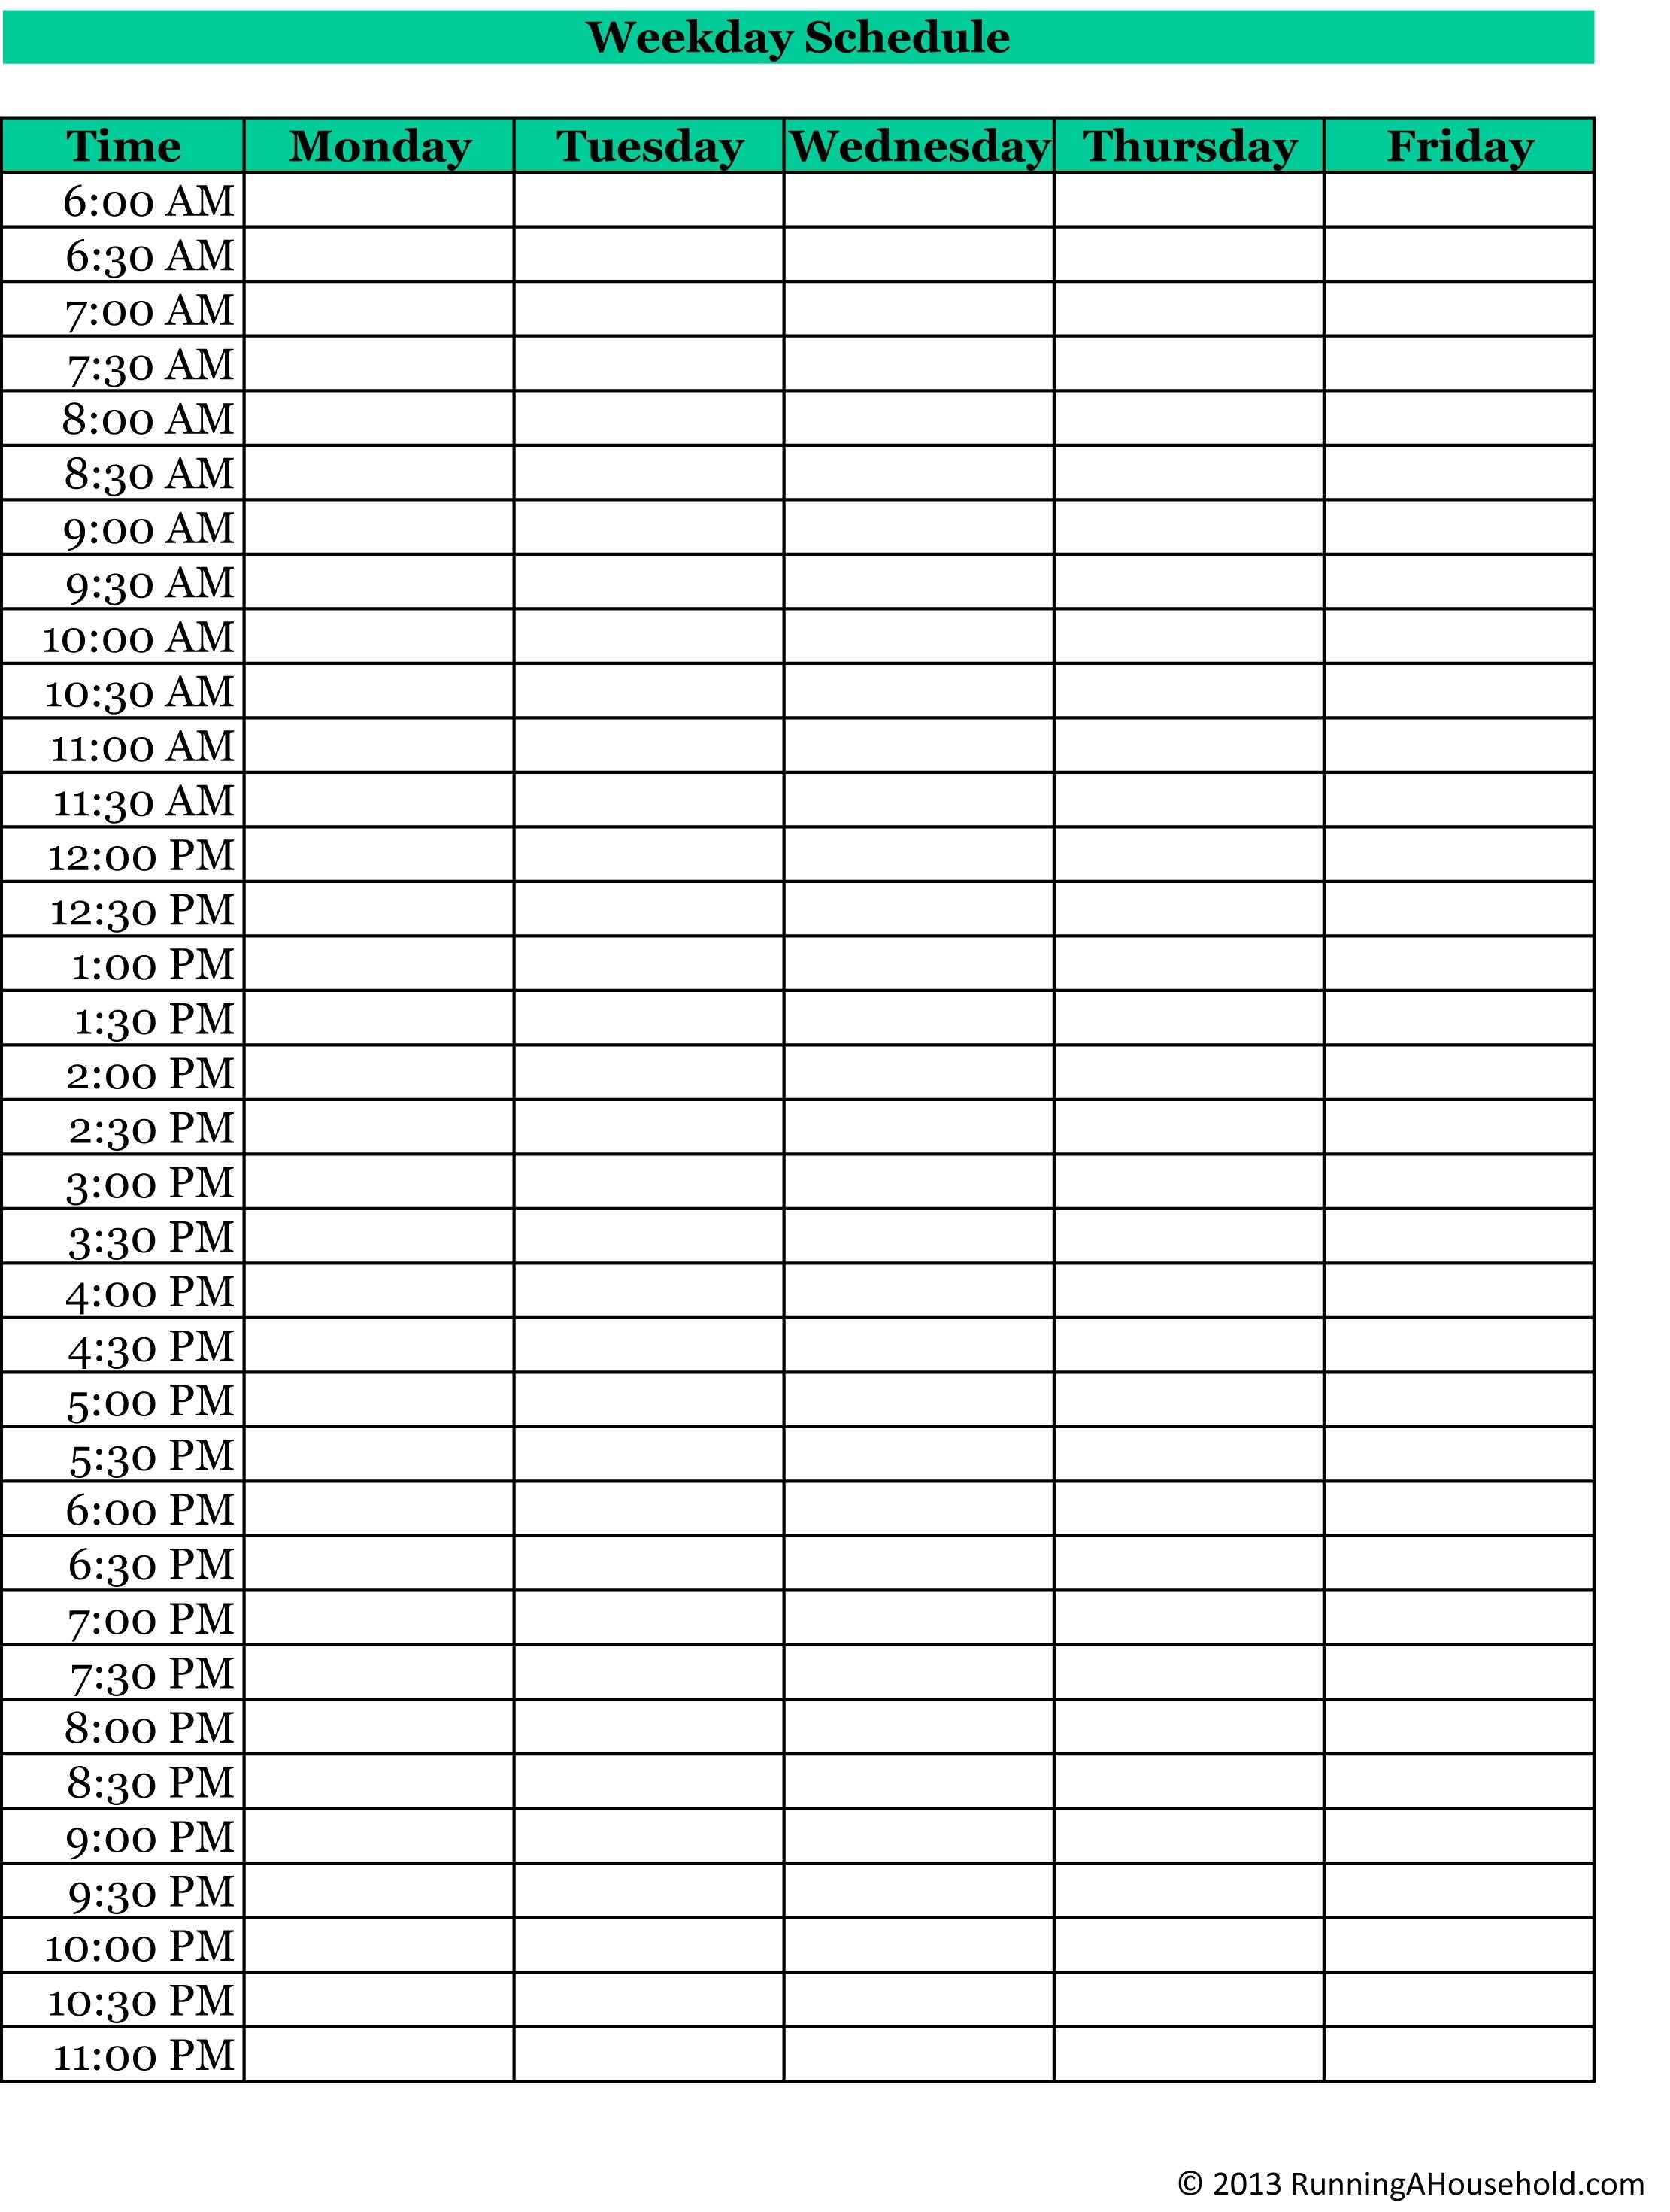 Blank Weekly Schedule With Times Free Printable Calendar Time | Smorad with Printable Weekly Schedule With Hours Monday To Friday